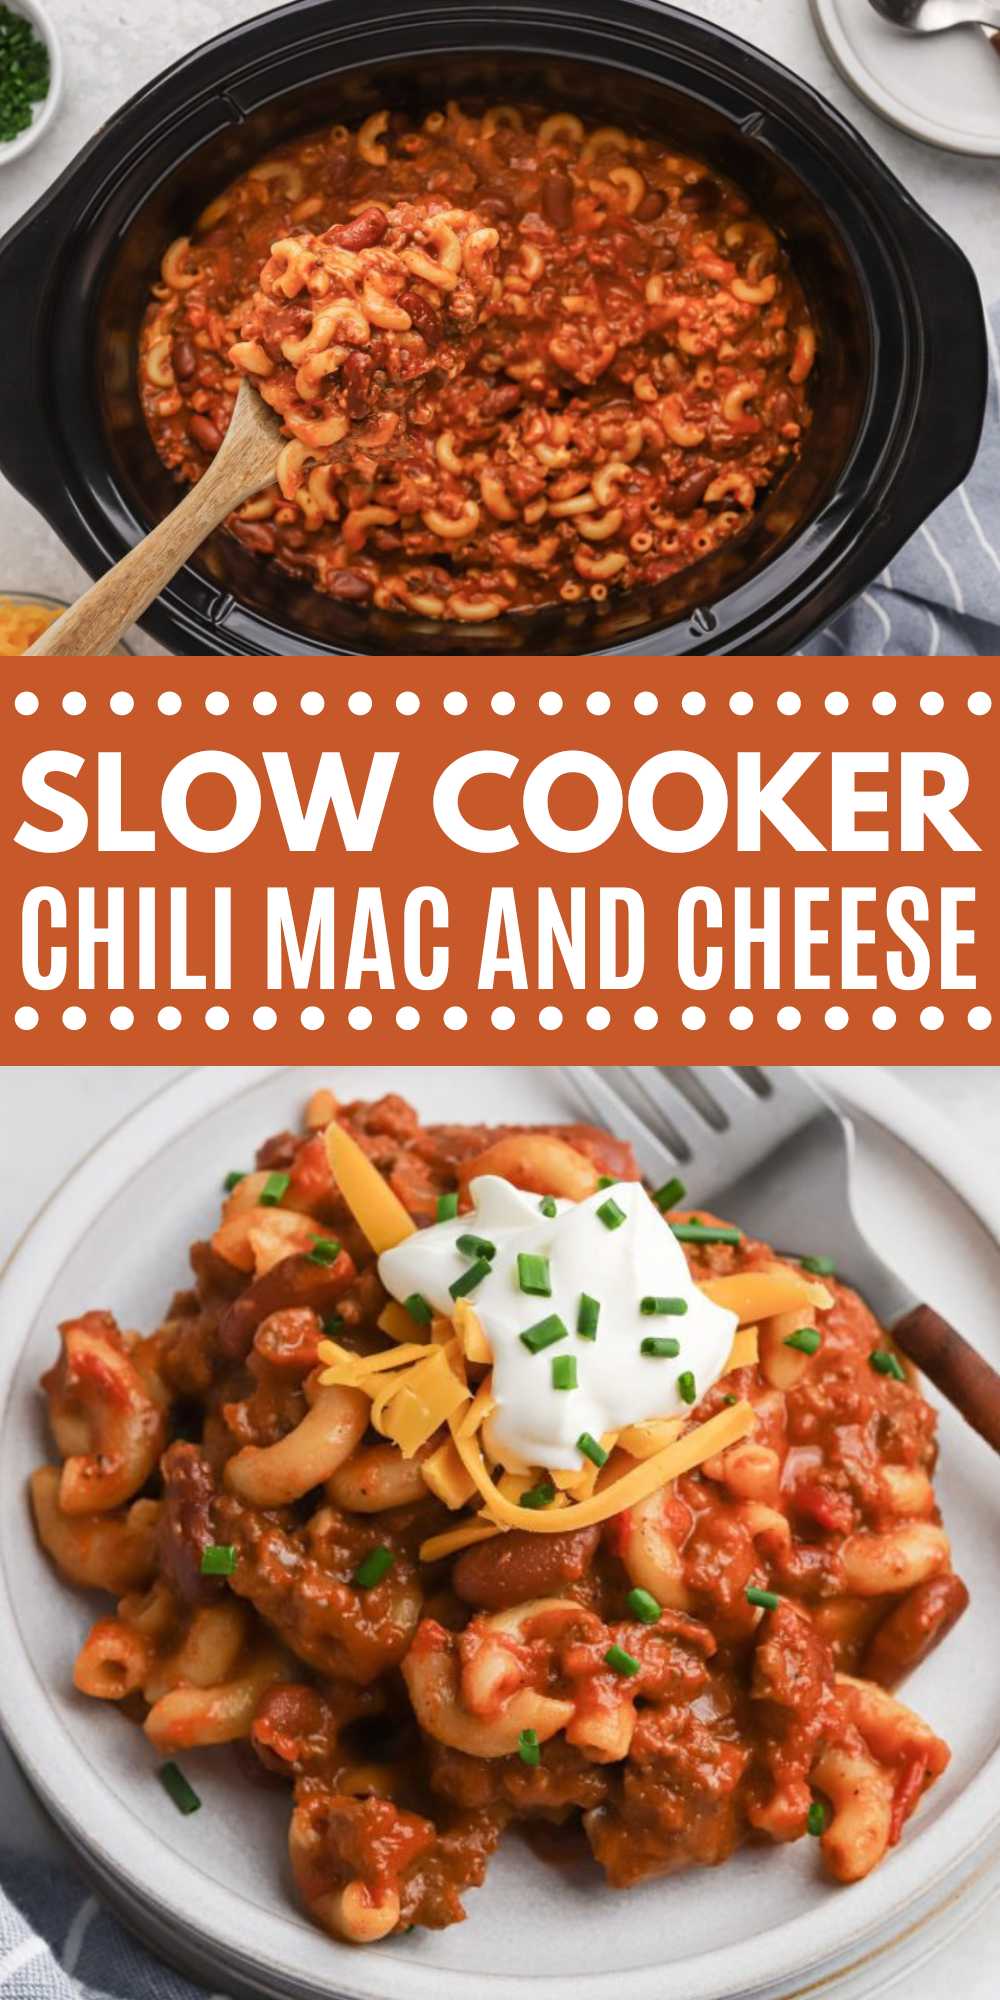 Crock Pot Chili Mac and Cheese Recipe is the best of both worlds. Everything you love about chili and mac and cheese come together for an incredible meal. Plus, the slow cooker makes this simple for busy weeknights. #eatingonadime #slowcookerrecipes #chilimacandcheese